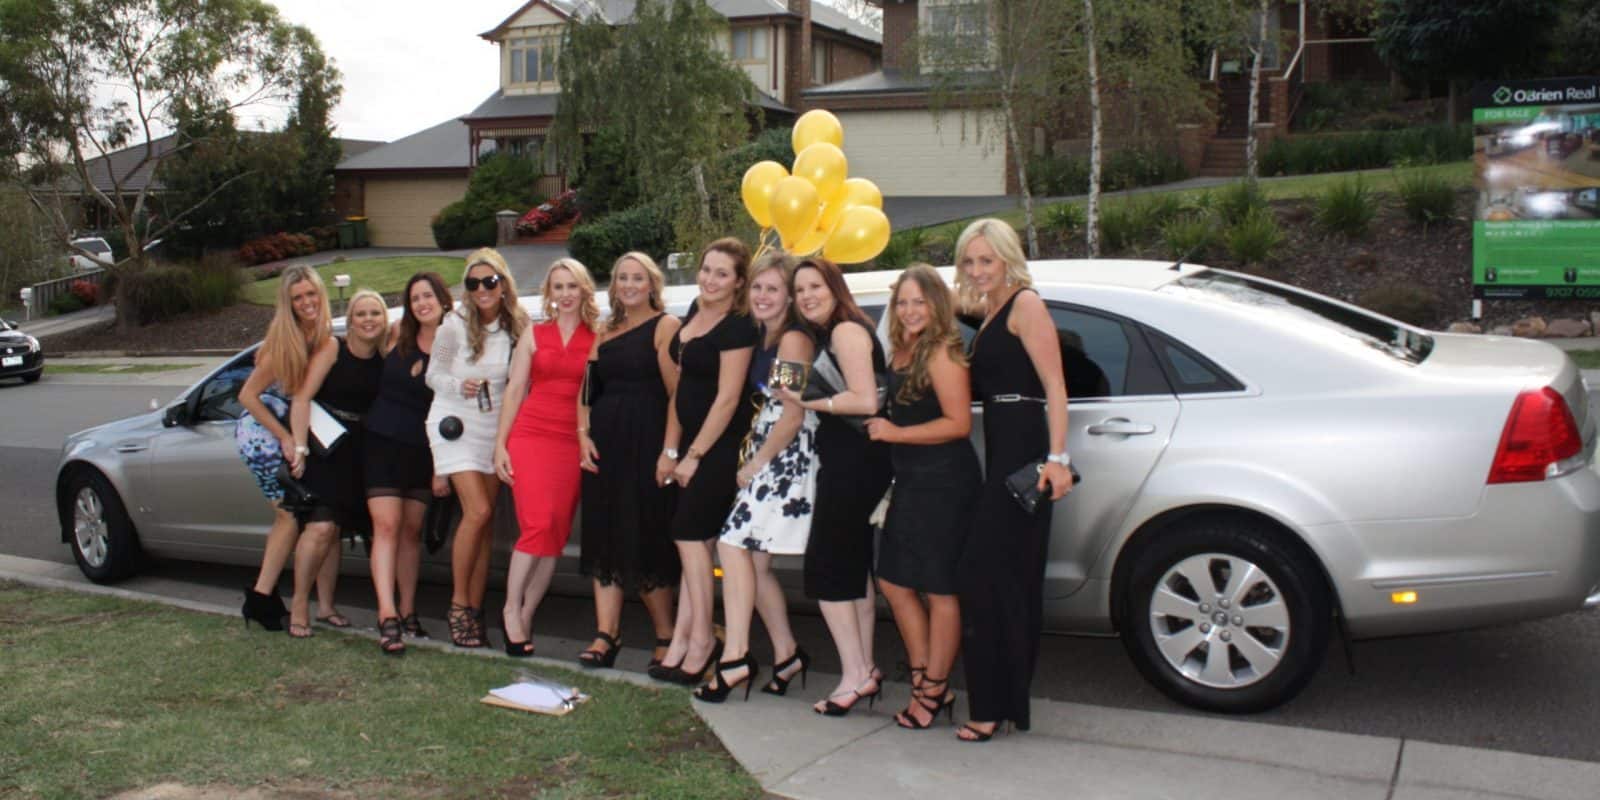 Group of women in front of limo